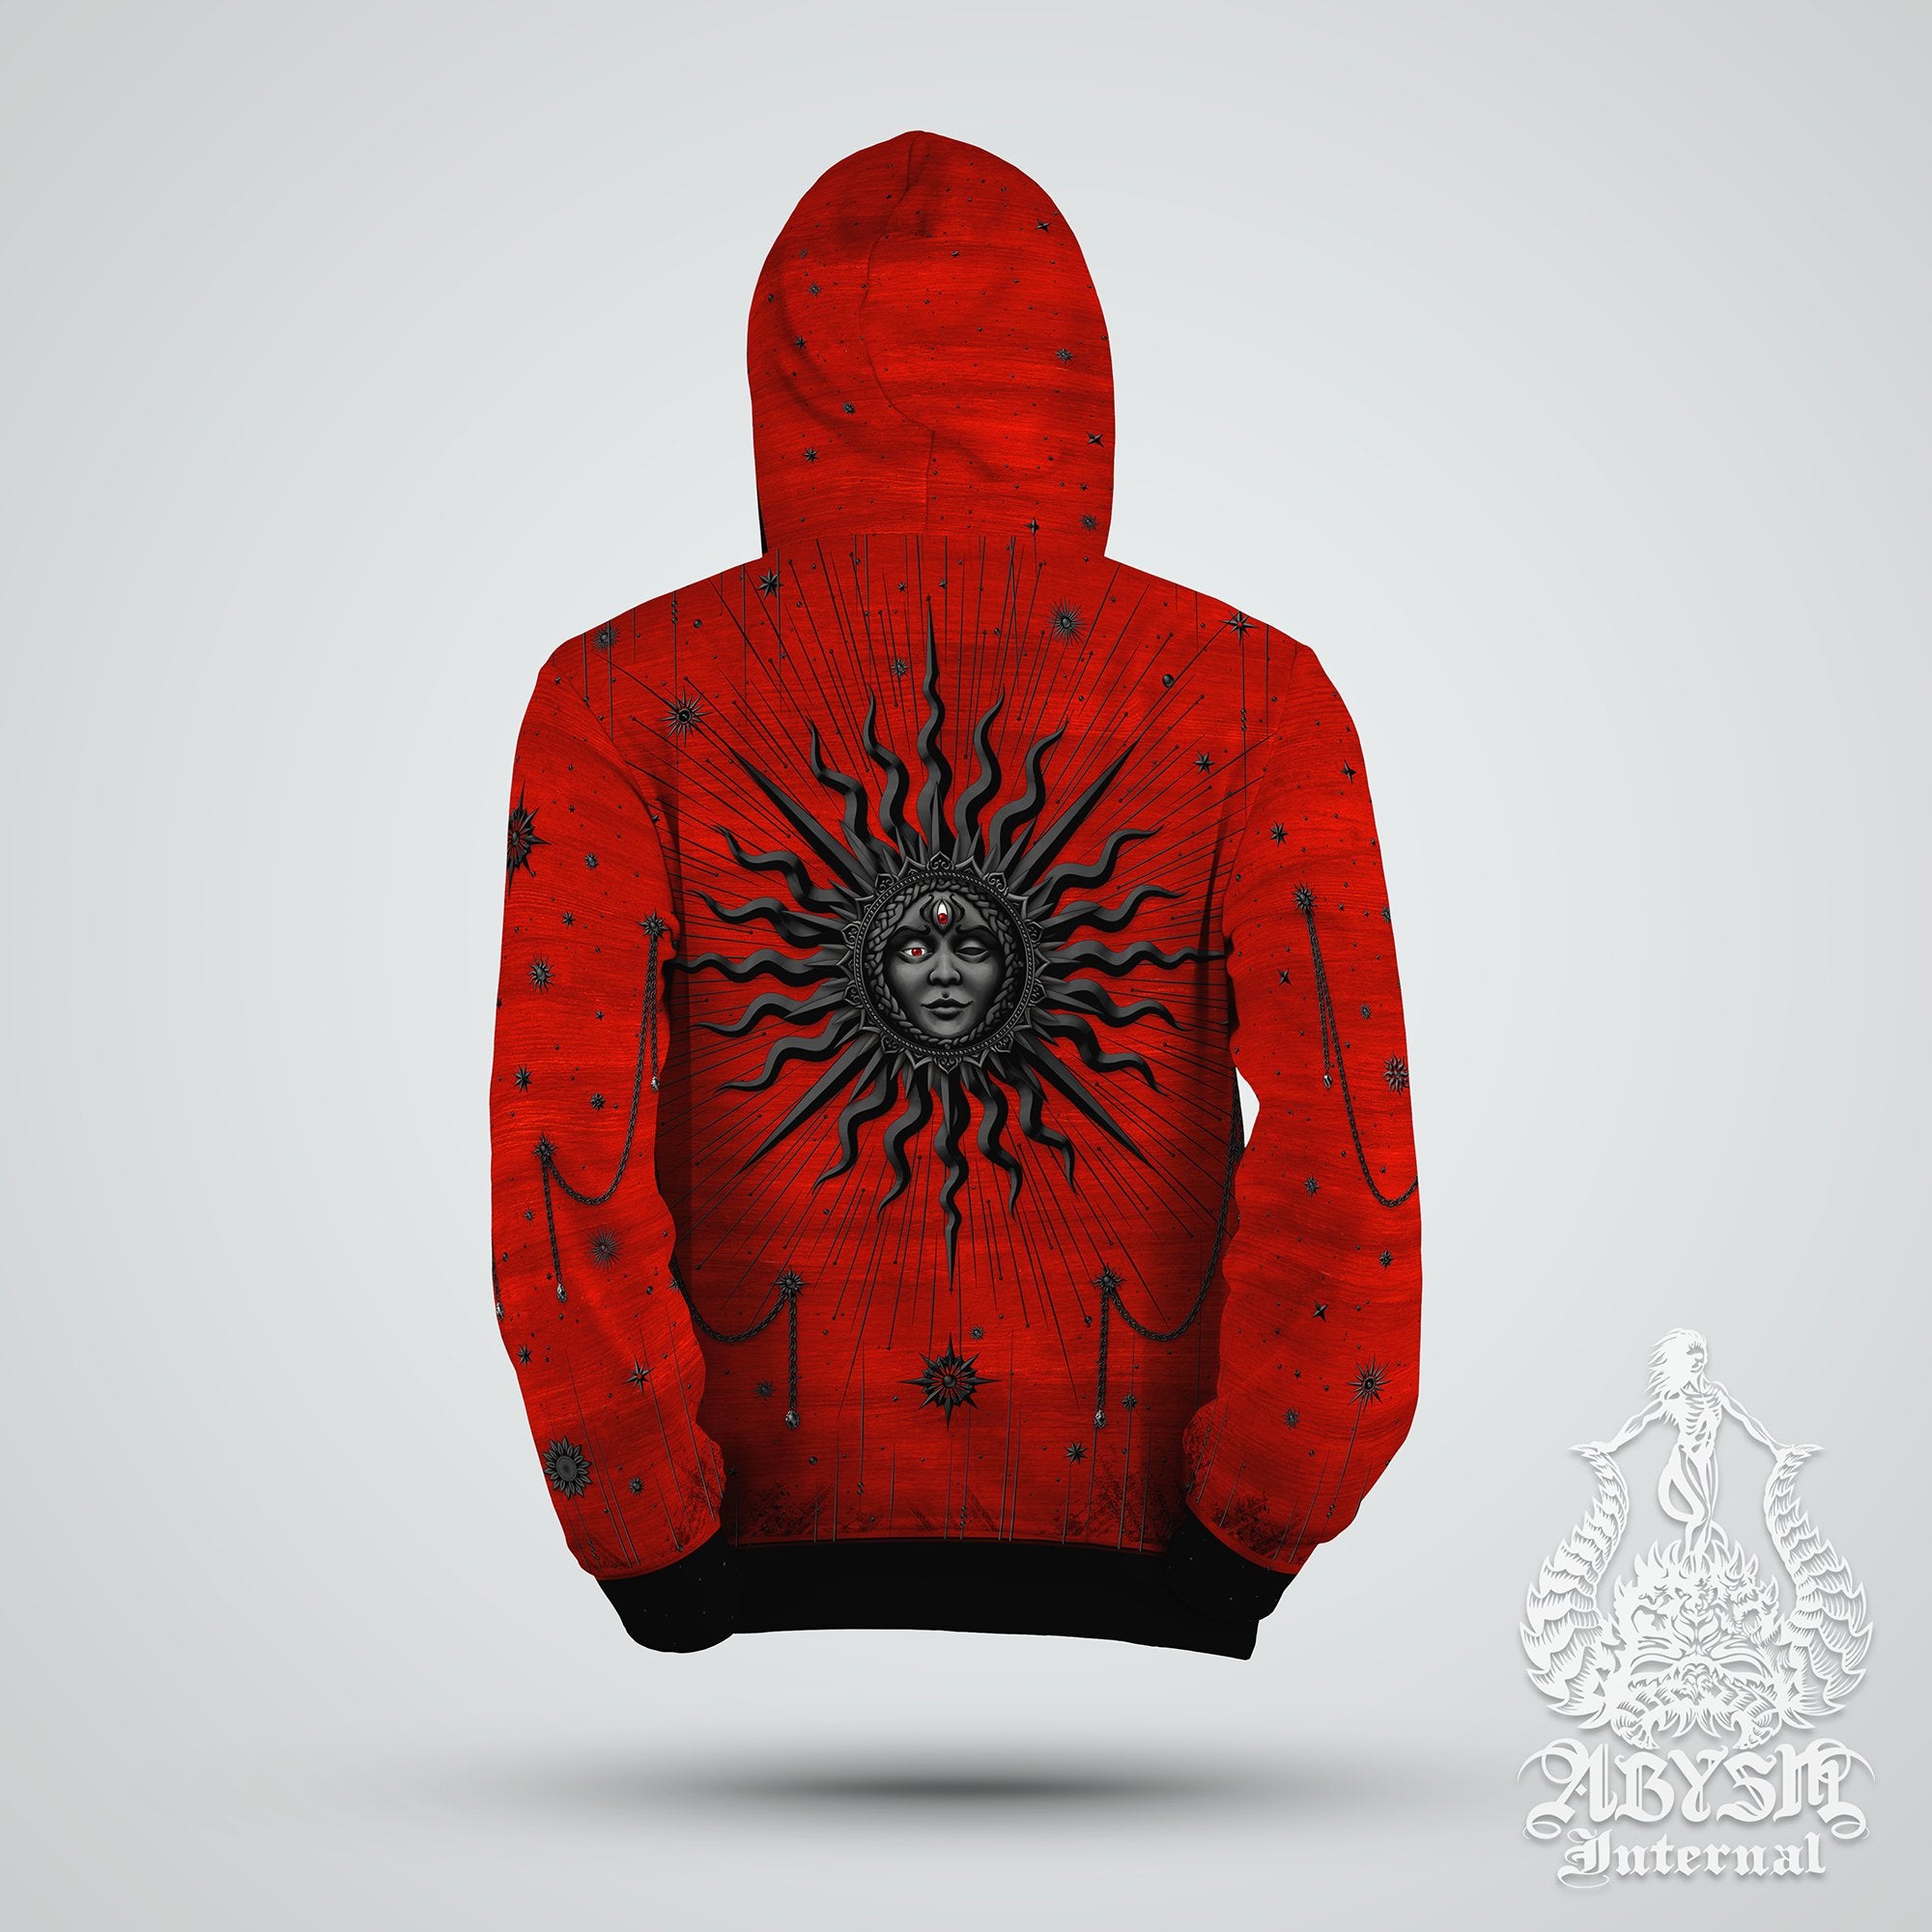 Gothic Black Sun Hoodie, Red Witch Pullover, Wizard Sweater, Bloody Tarot Arcana Outfit, Goth Magic, Esoteric Streetwear, Alternative Clothing, Unisex - Abysm Internal